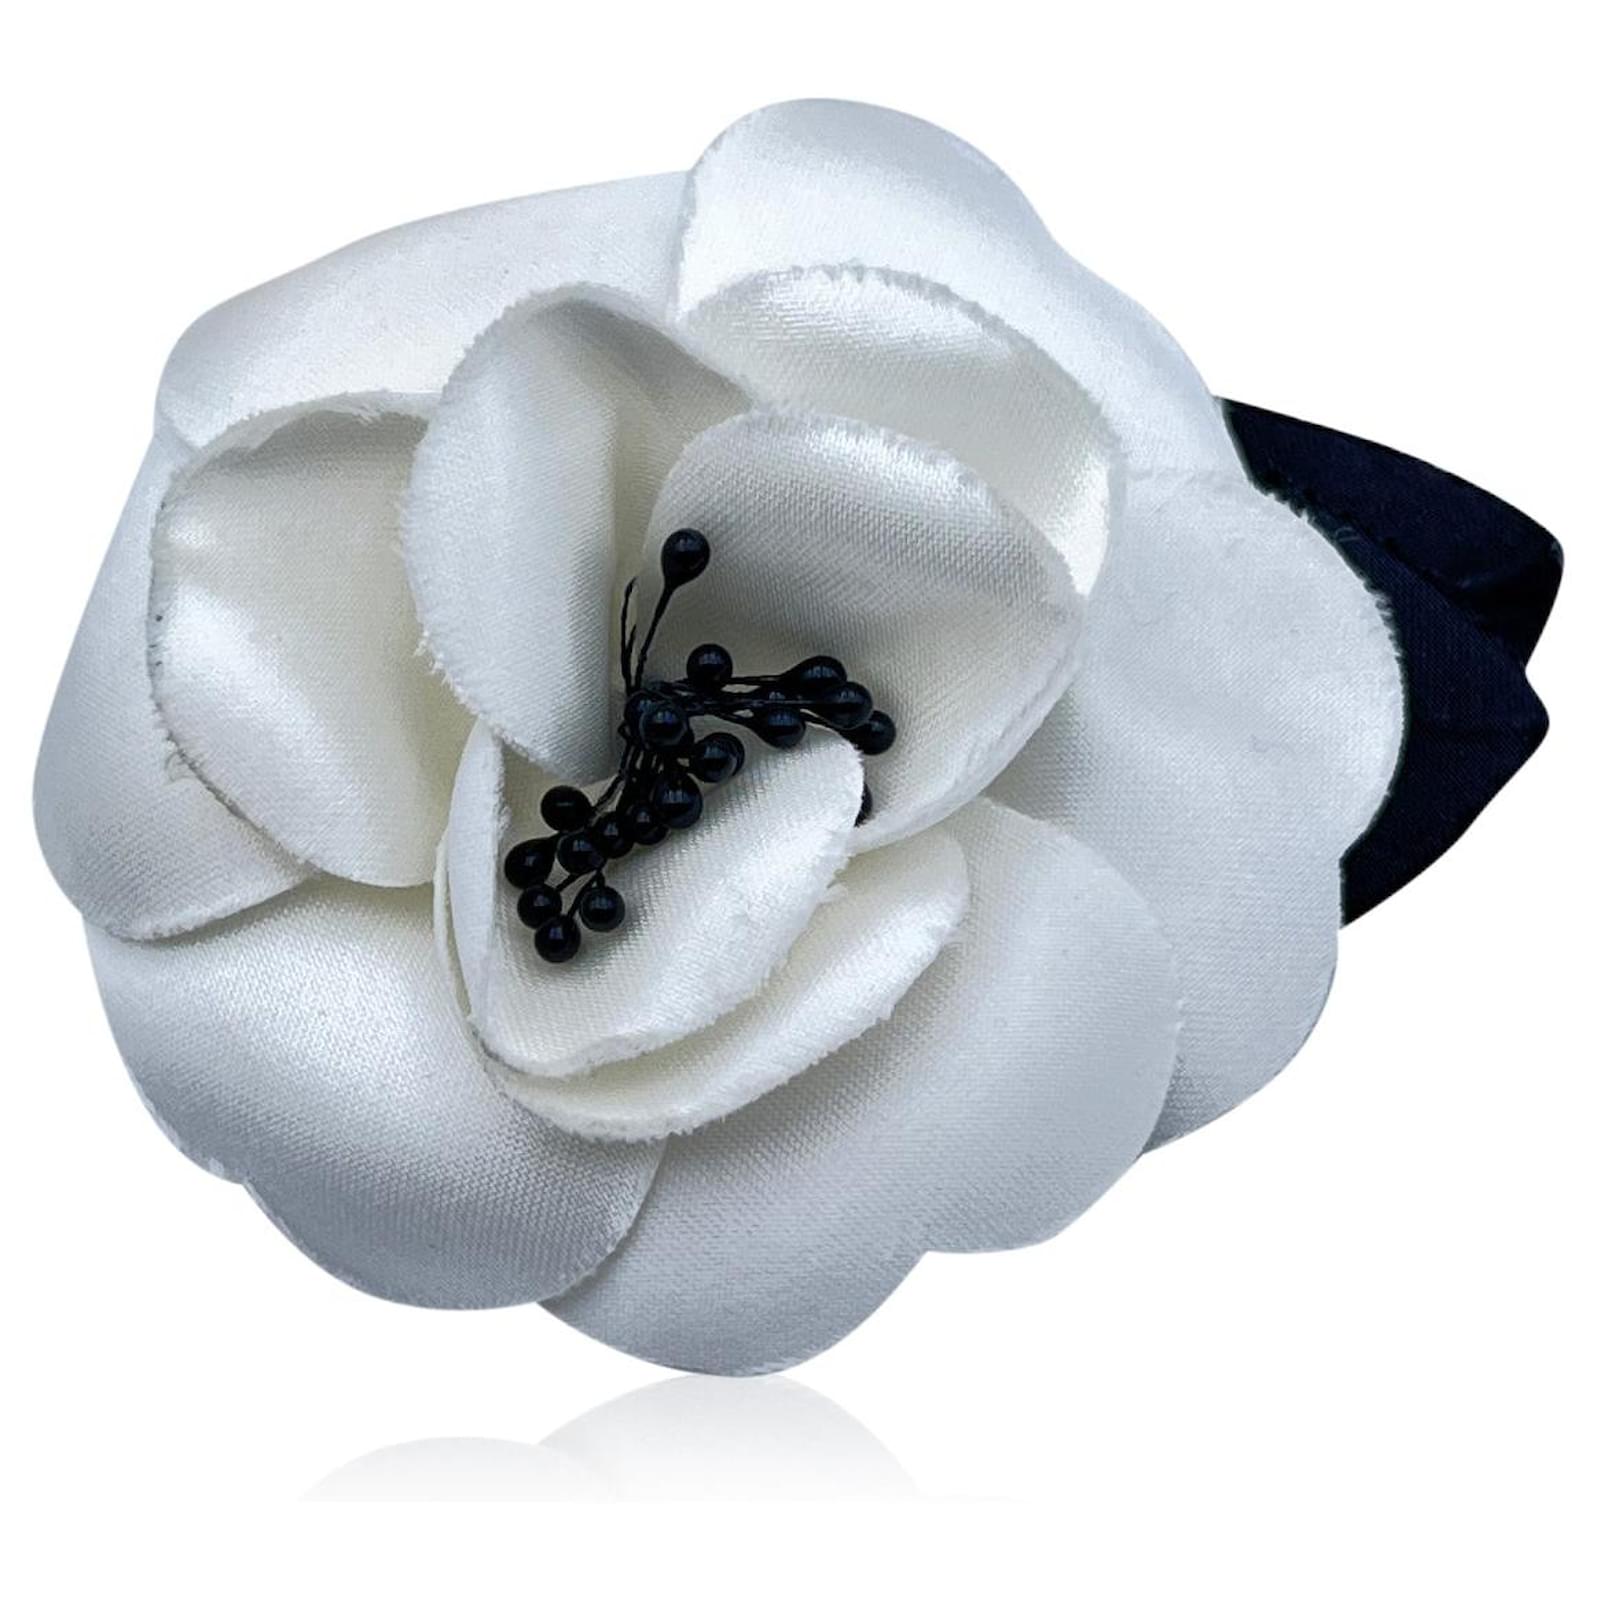 Vintage White and Black Silk Camelia Camellia Flower Pin Brooch